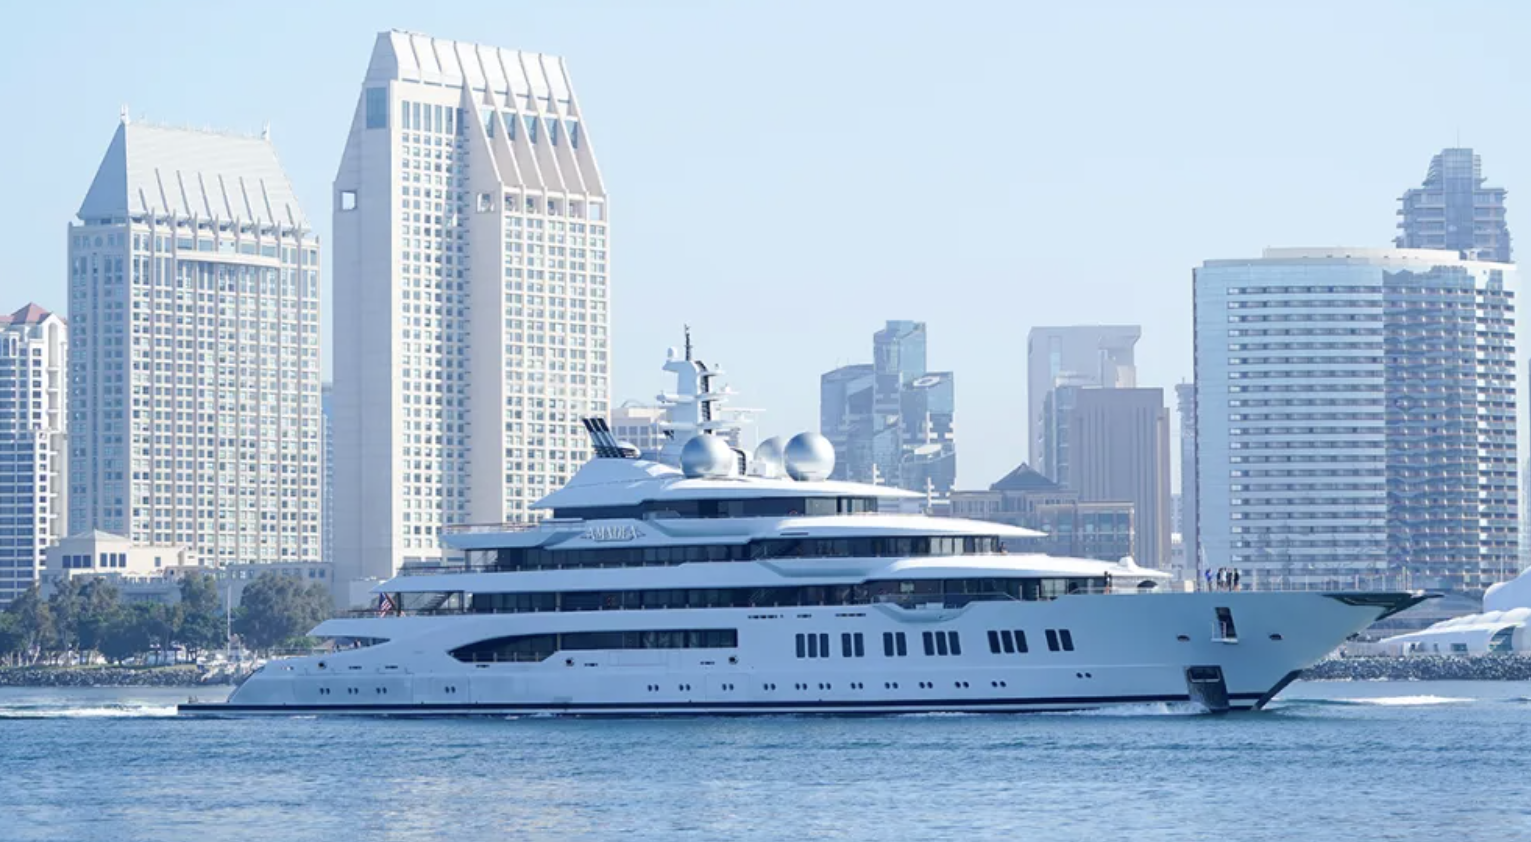 Superyachts, Megayachts, Seized Suoeryacht, Russian Oligarch, Robb Report, Luxury Yachting